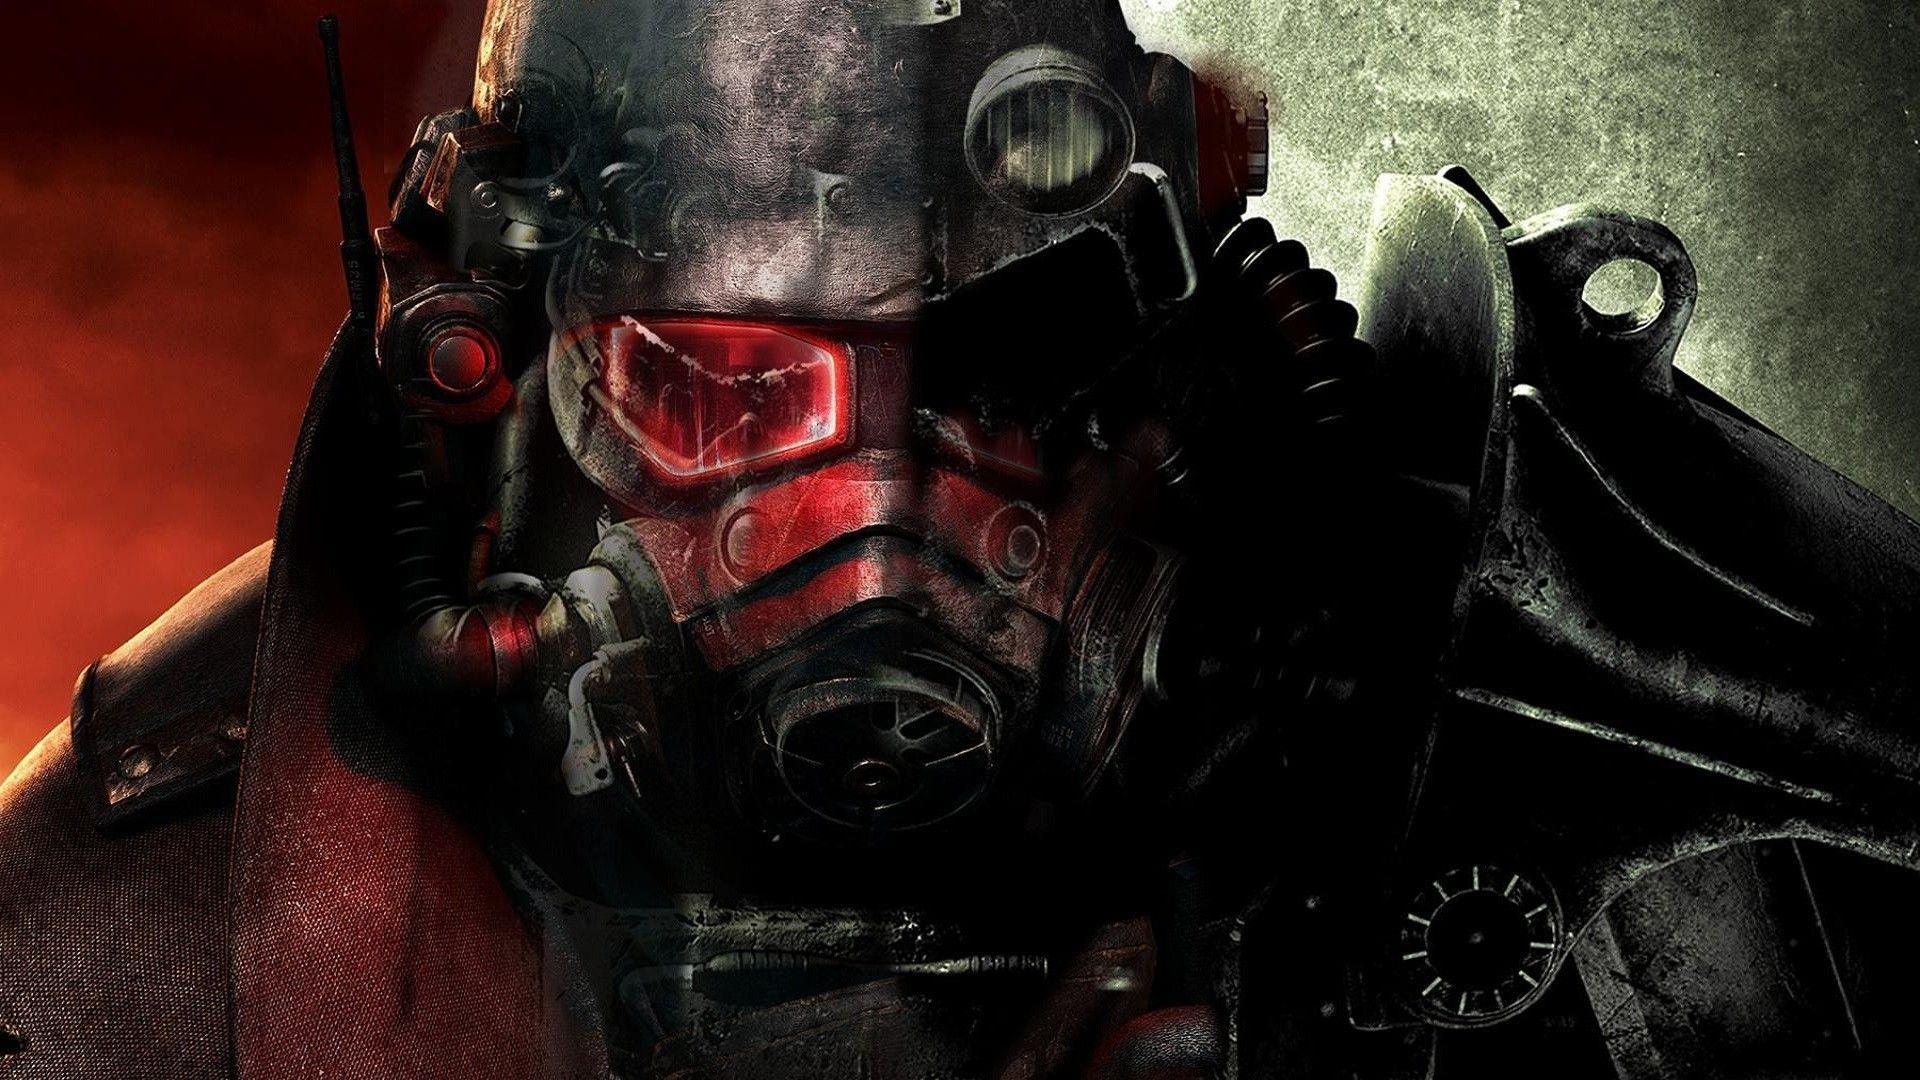 Fallout Brotherhood of Steel Wallpaper. Android